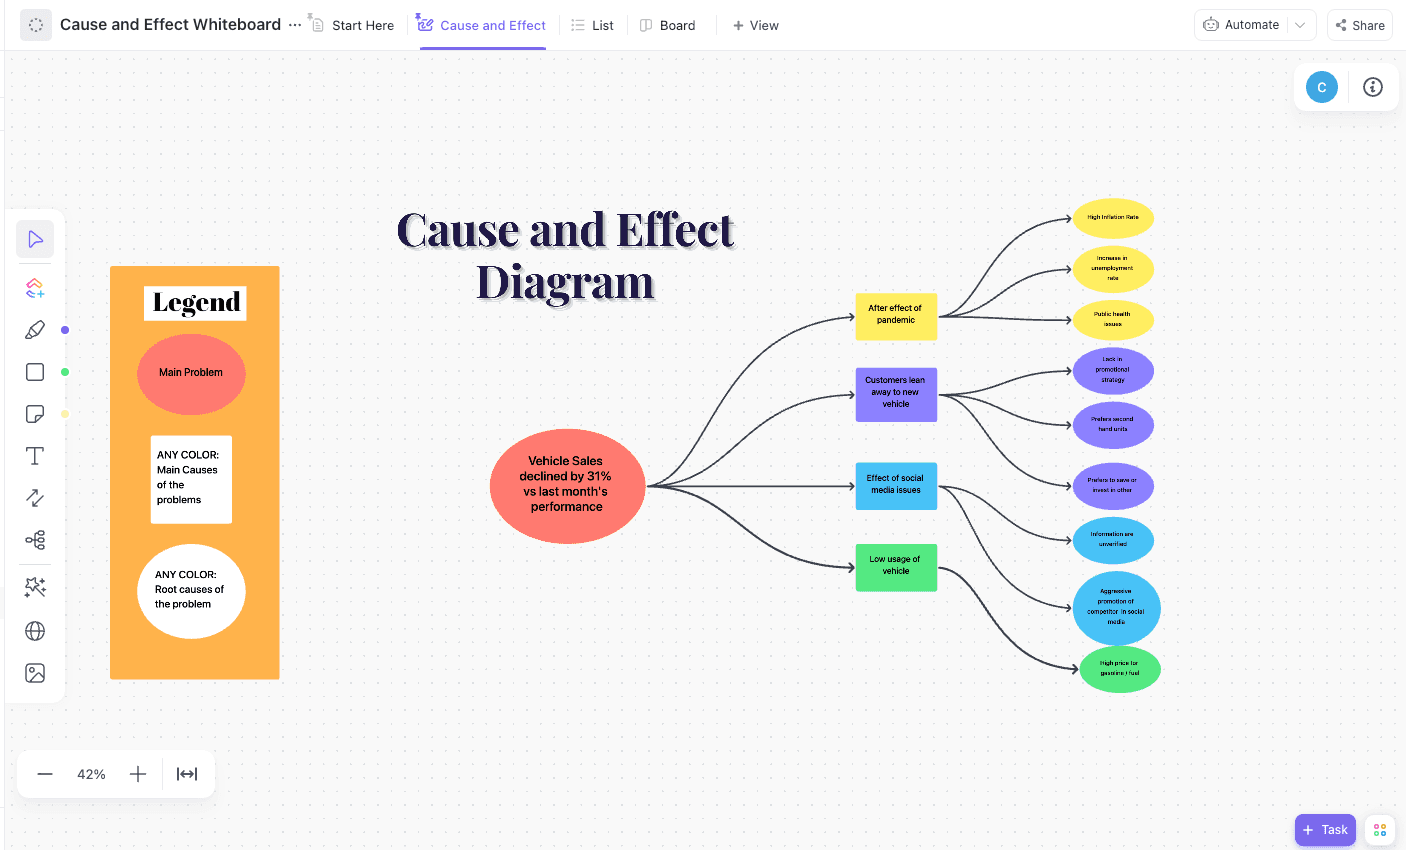 The Cause and Effect Diagram is a visual tool that helps the user to understand the root causes of the problem. It categorizes the root cause based on the leading reason that will ultimately result in the effect. Use this Whiteboard template to build out your diagram and gain future insight.